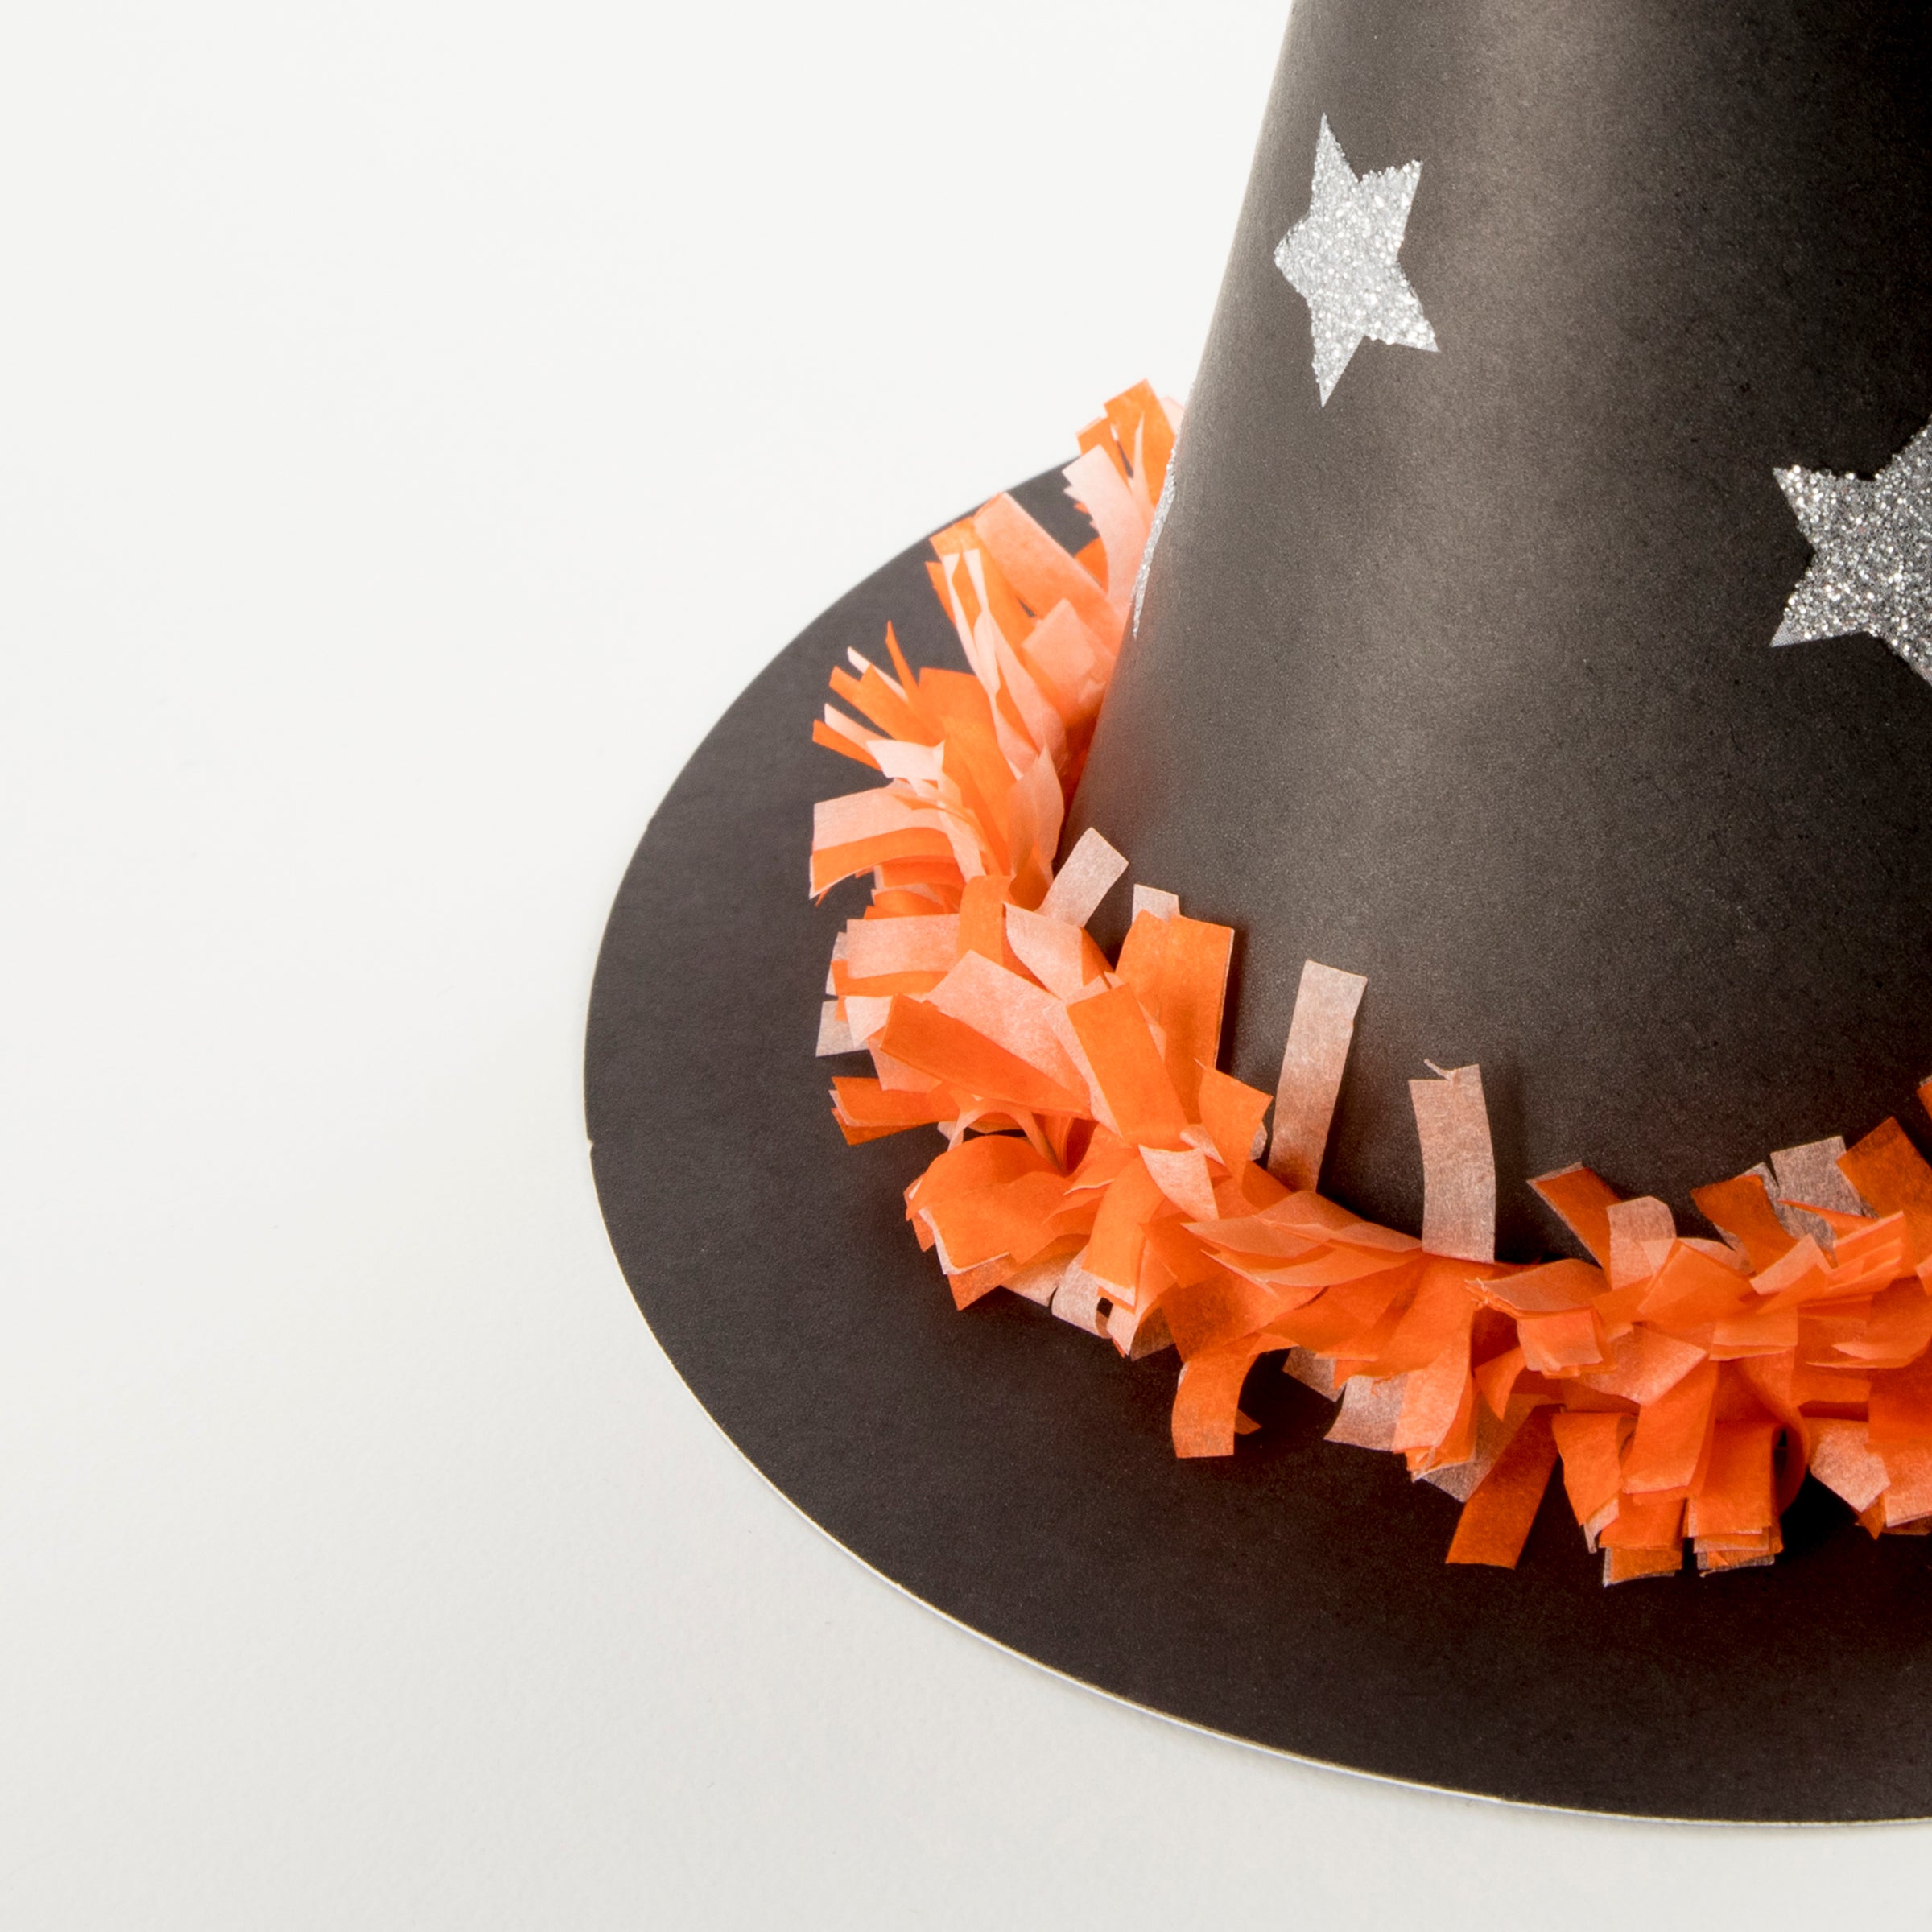 If you're looking for Halloween accessories you'll love these witch hats with bright tissue paper festooning.